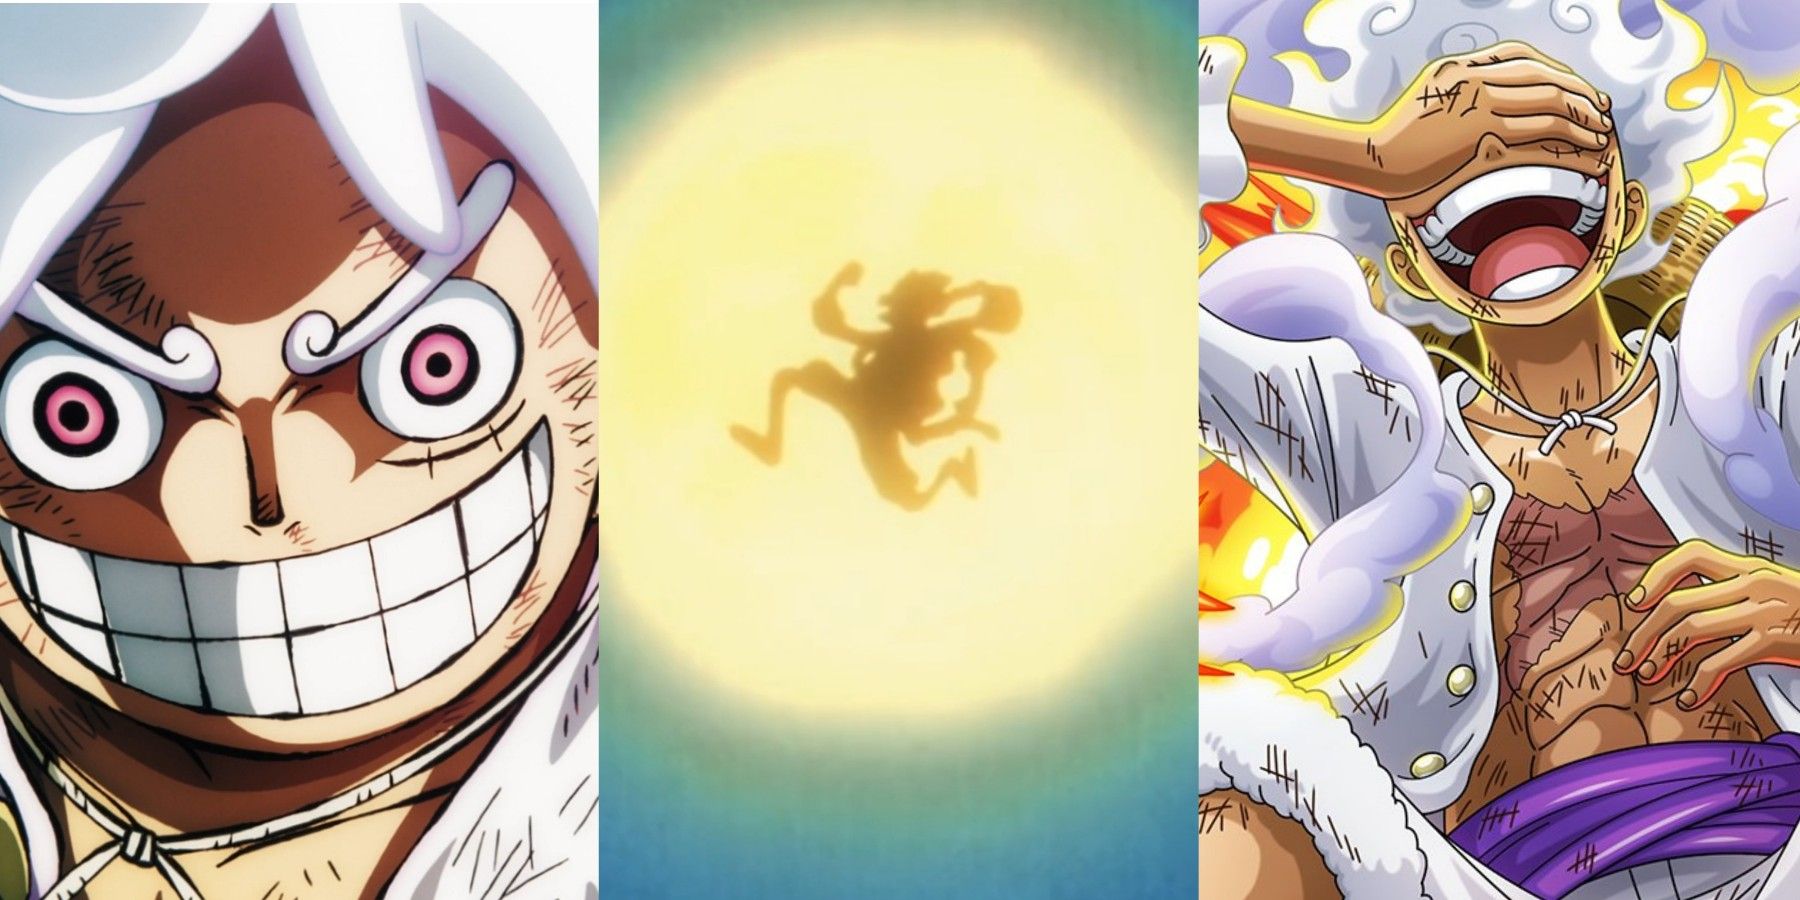 One Piece Episode 1071: Why Gear 5 fan reactions were not all positive?